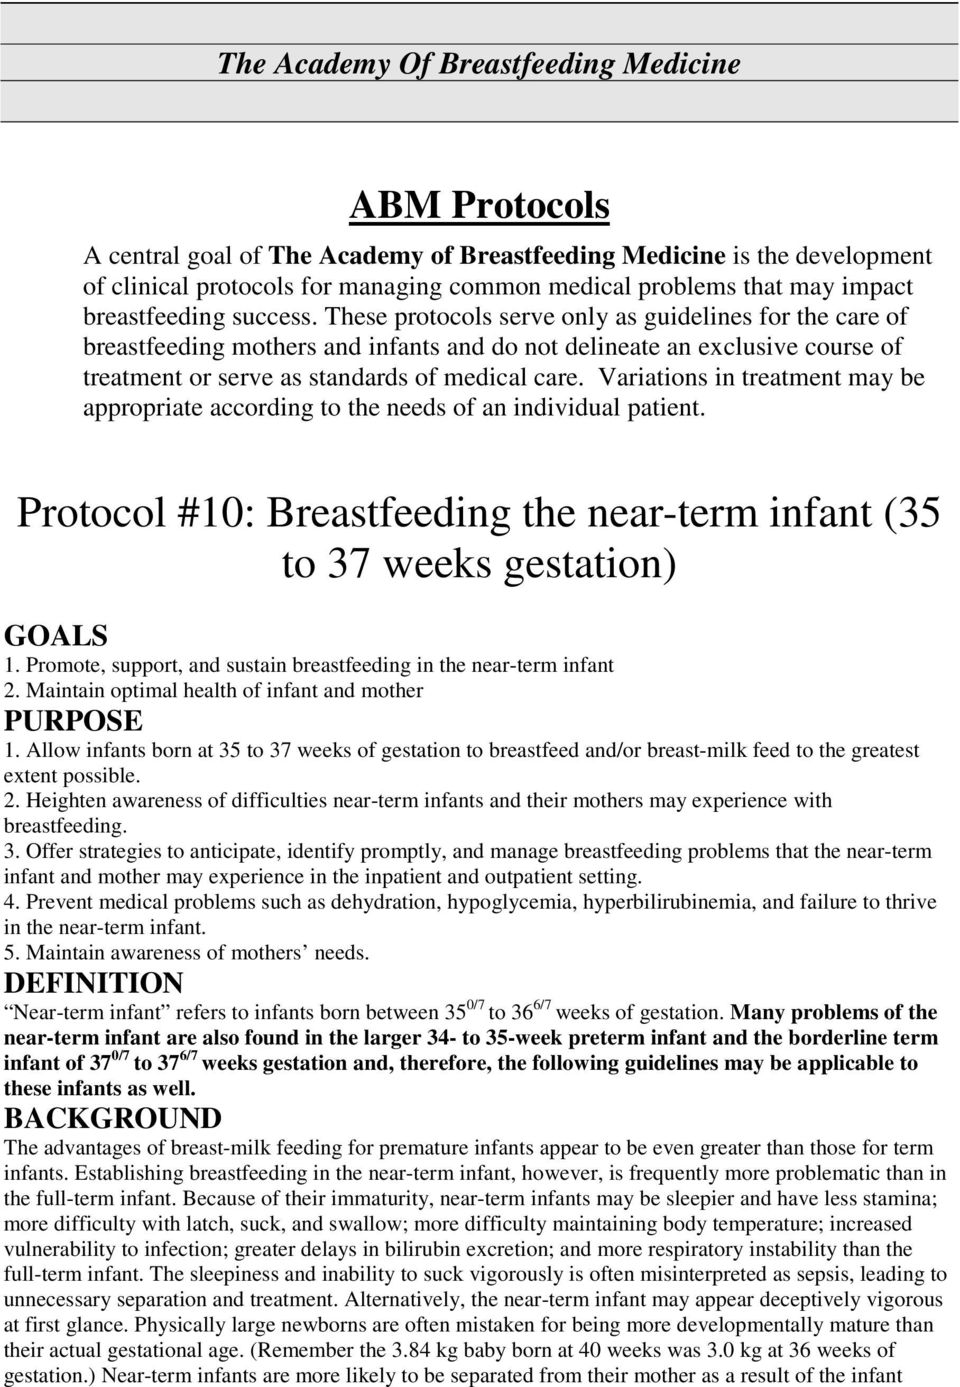 These protocols serve only as guidelines for the care of breastfeeding mothers and infants and do not delineate an exclusive course of treatment or serve as standards of medical care.